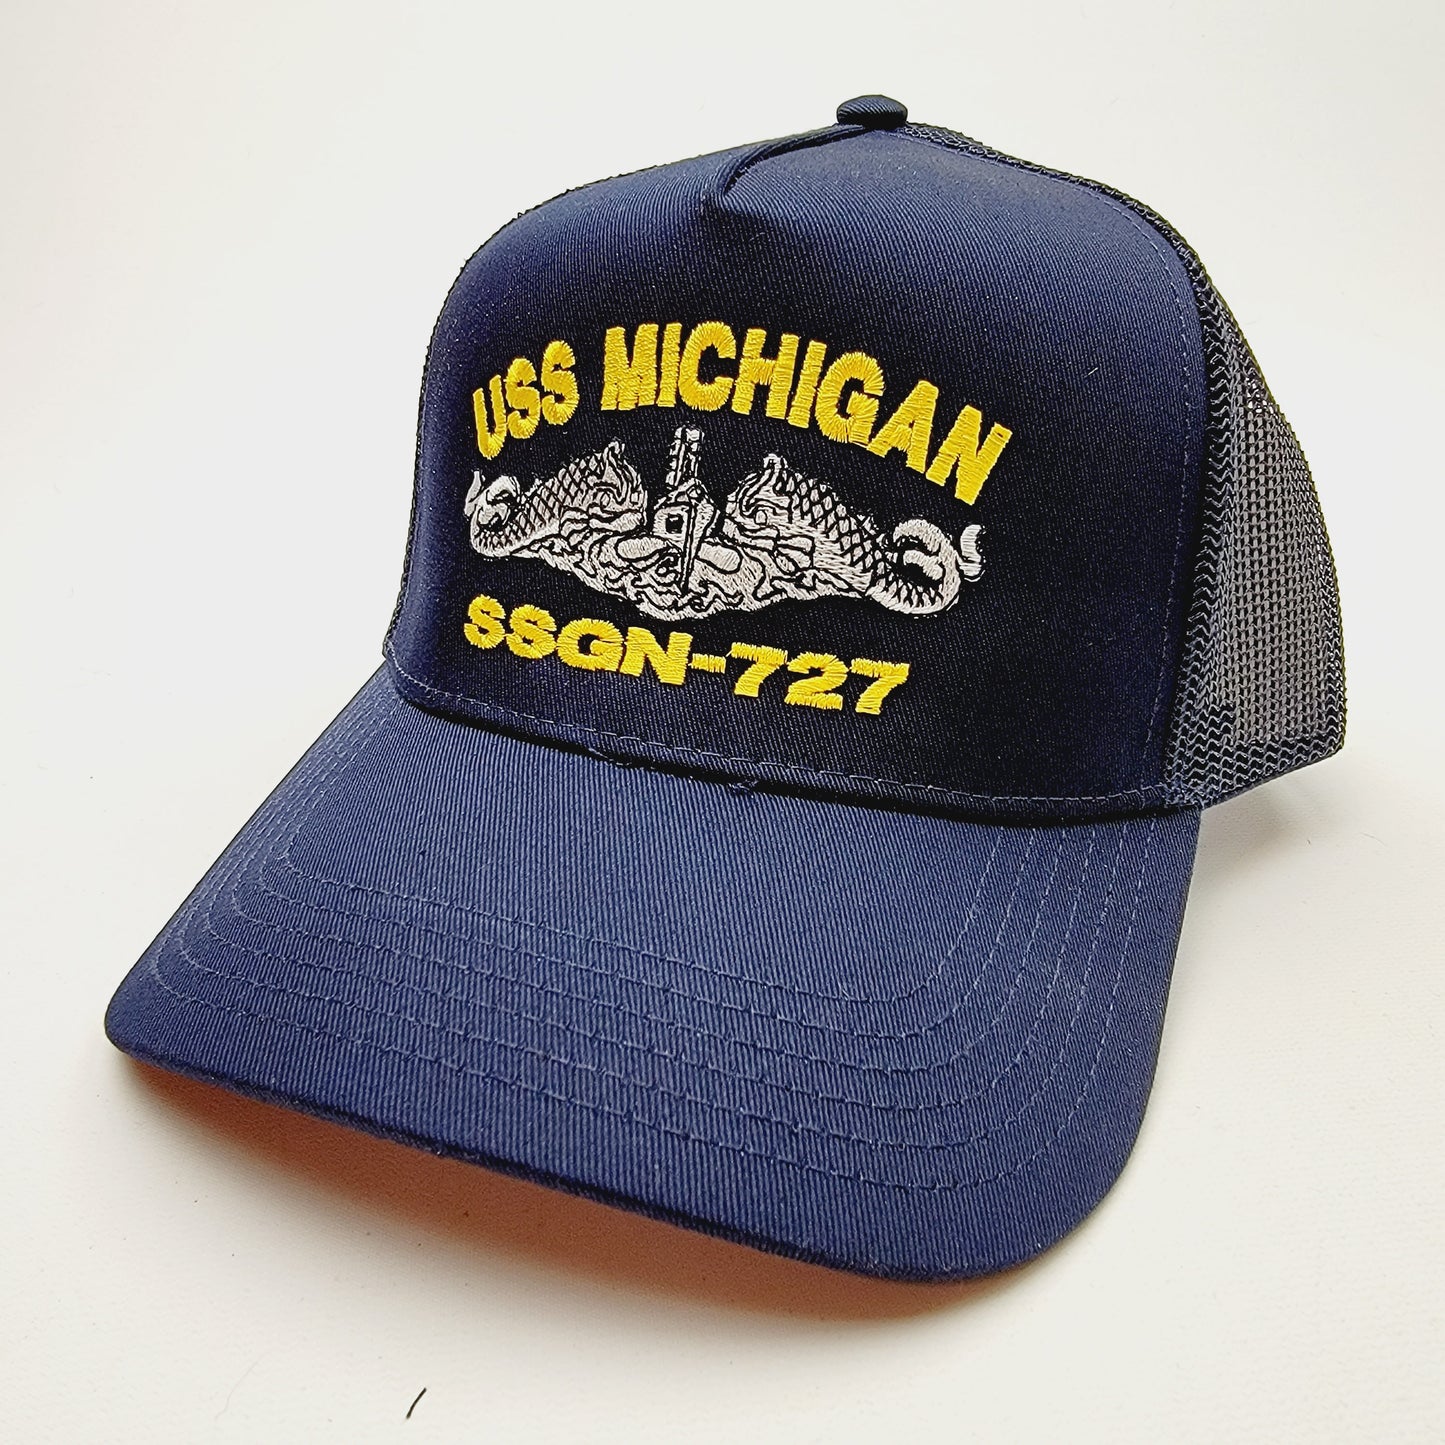 US NAVY USS MICHIGAN SSGN-727 Embroidered Hat Baseball Cap Adjustable Blue